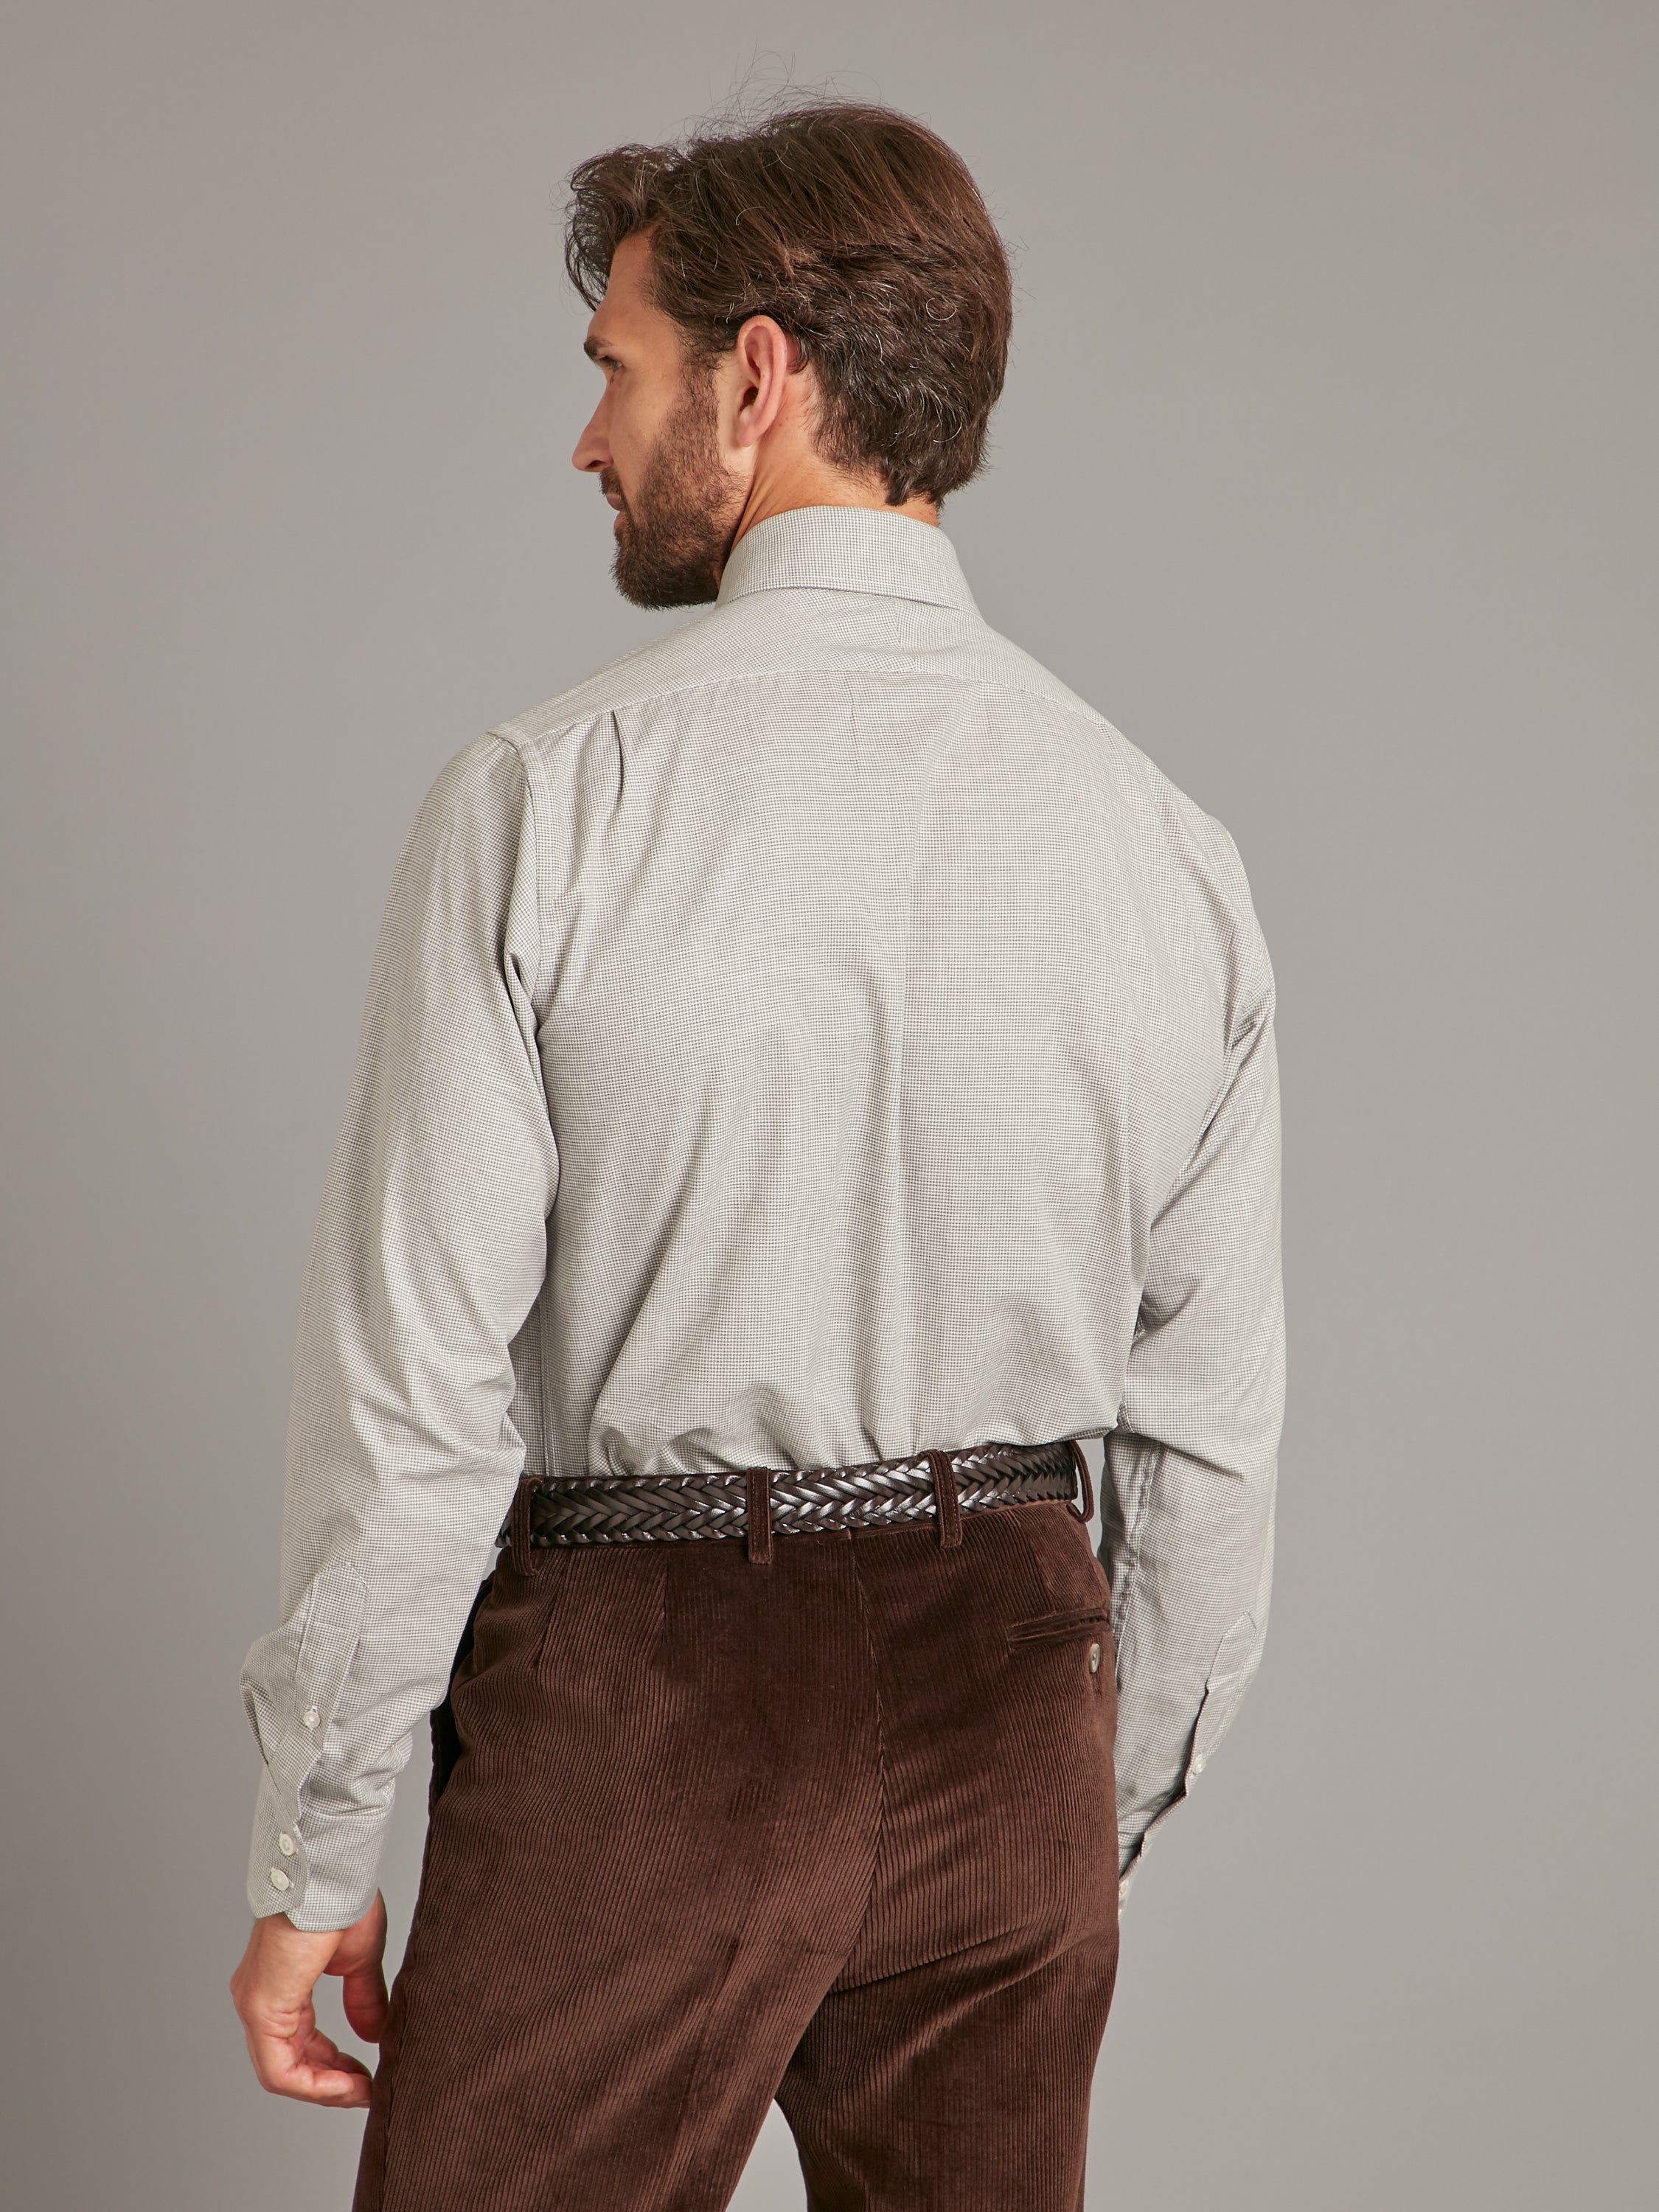 Formal Trouser Collection - Attire